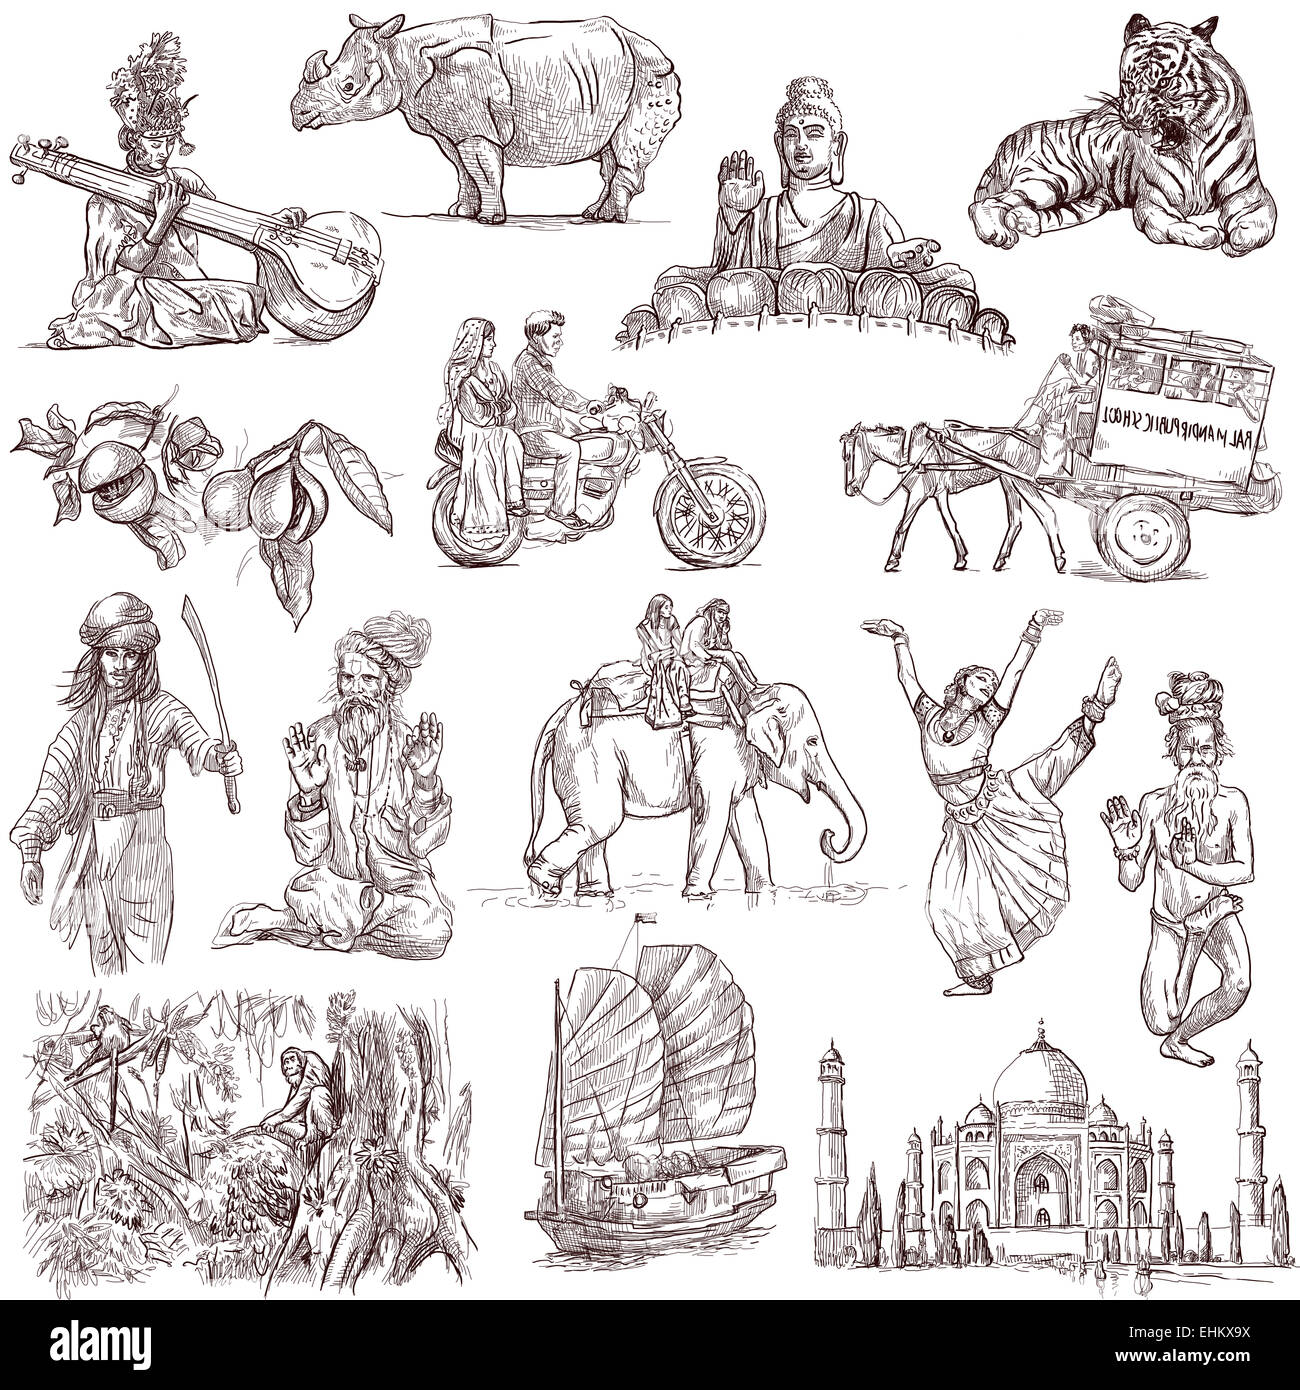 Travel series: INDIA and INDONESIA - Collection of an hand drawn illustrations. Description: Full sized hand drawn illustrations Stock Photo